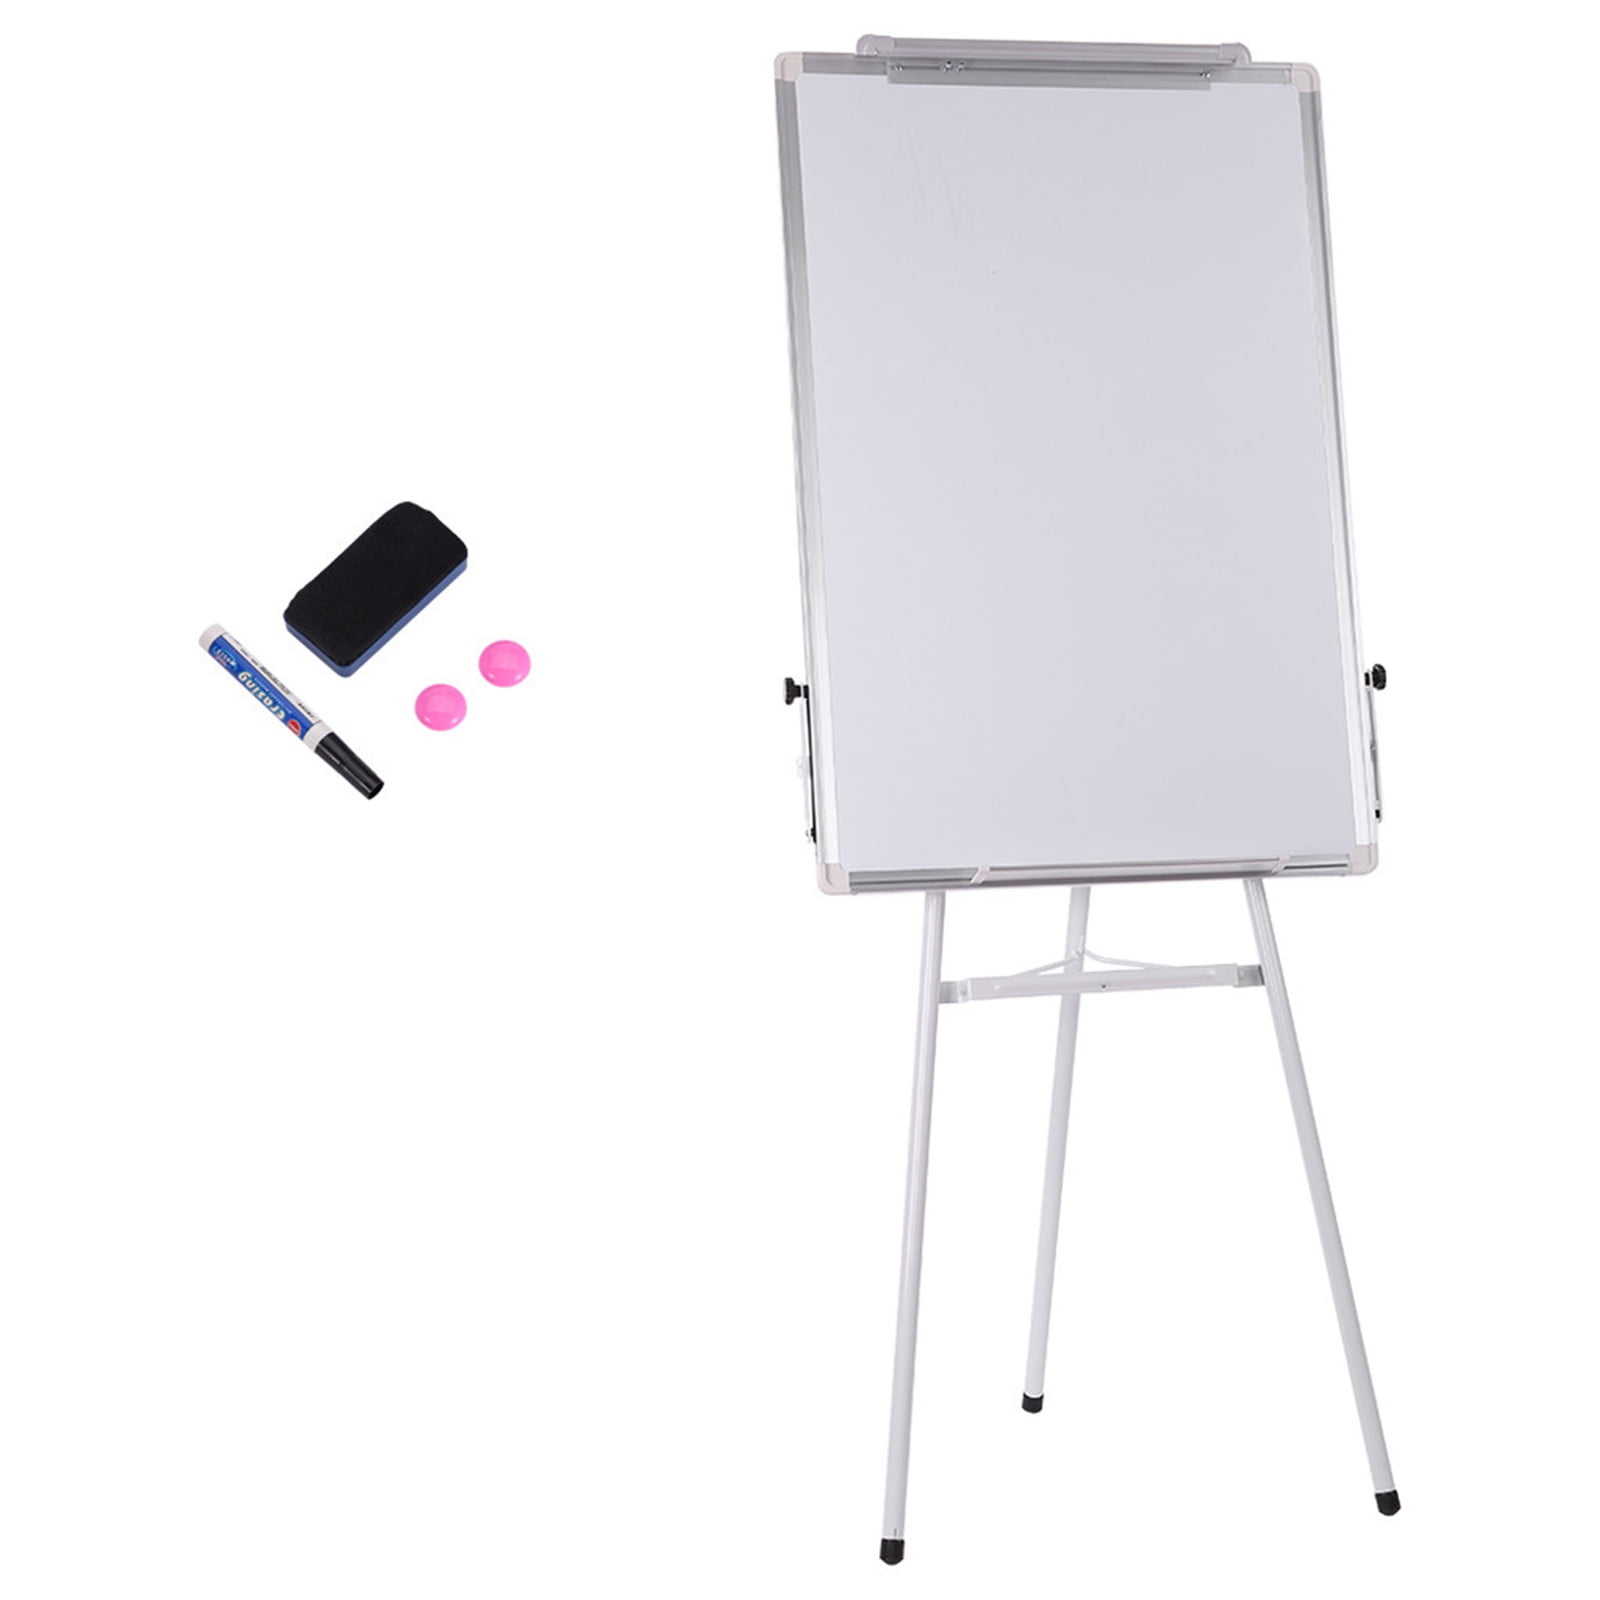 Details about   Dry Erase Board with Stand White Board Presentation Board magnetic whiteboard 